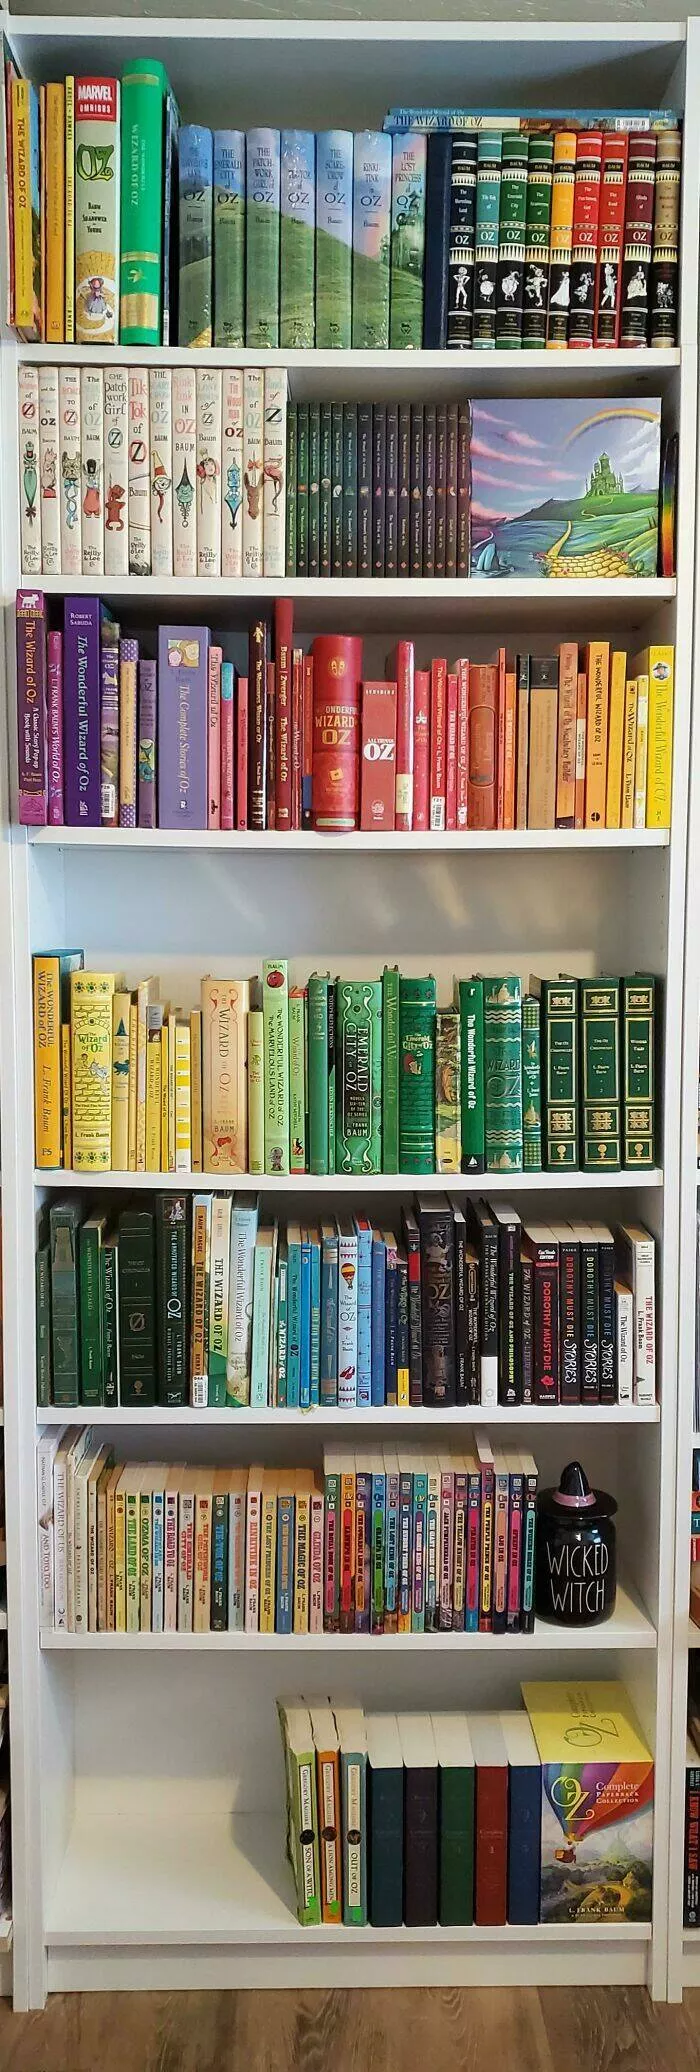 Quirky chronicles the evolution of unexpected obsessions into serious collections - #14 Wizard of Oz book collection.